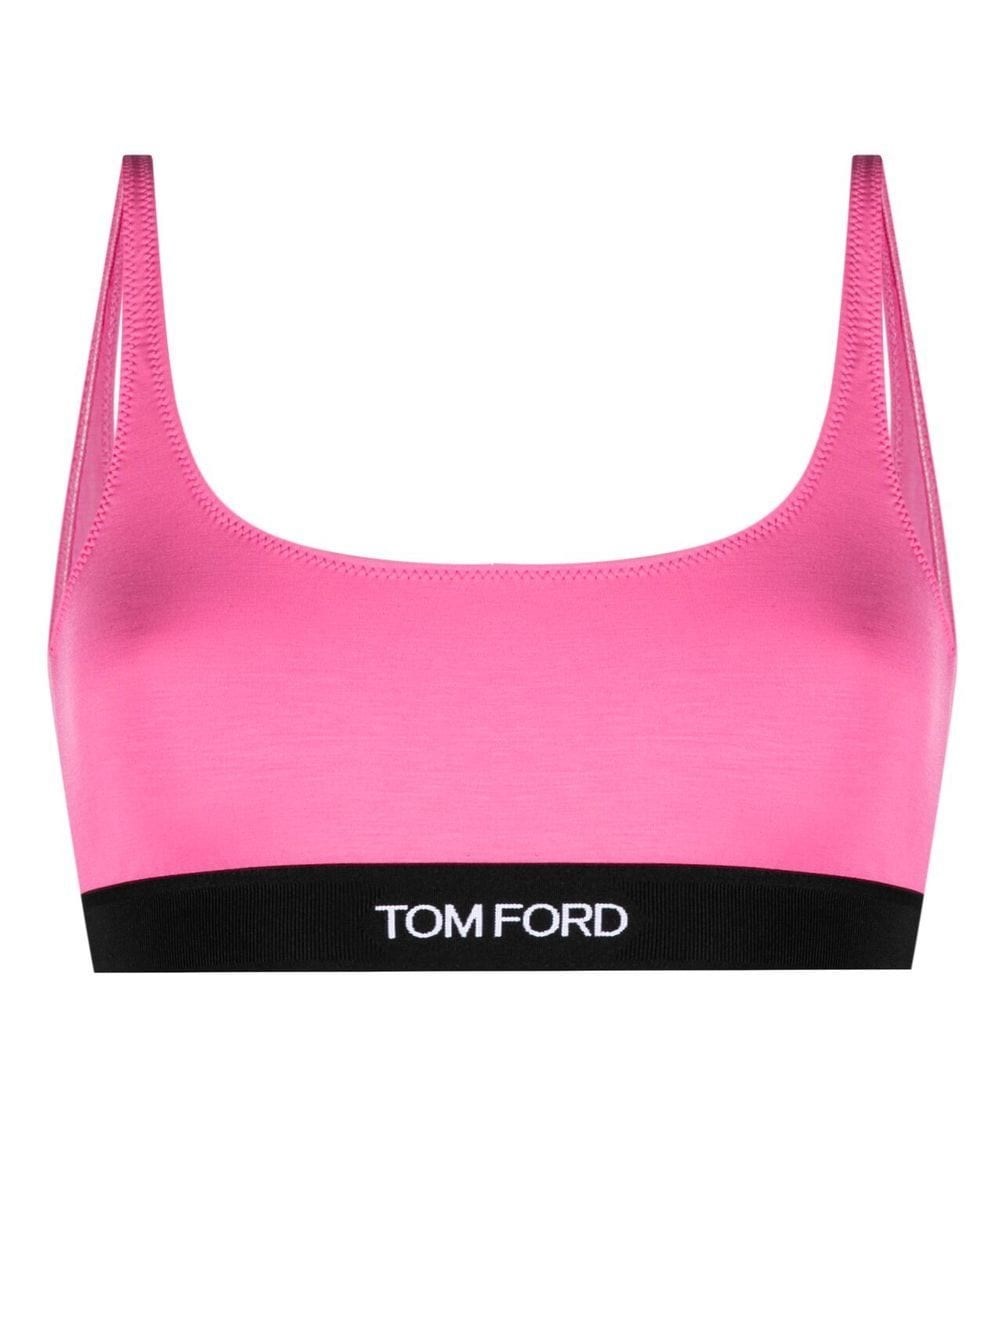 tom ford BRA TOP available on  - 52181